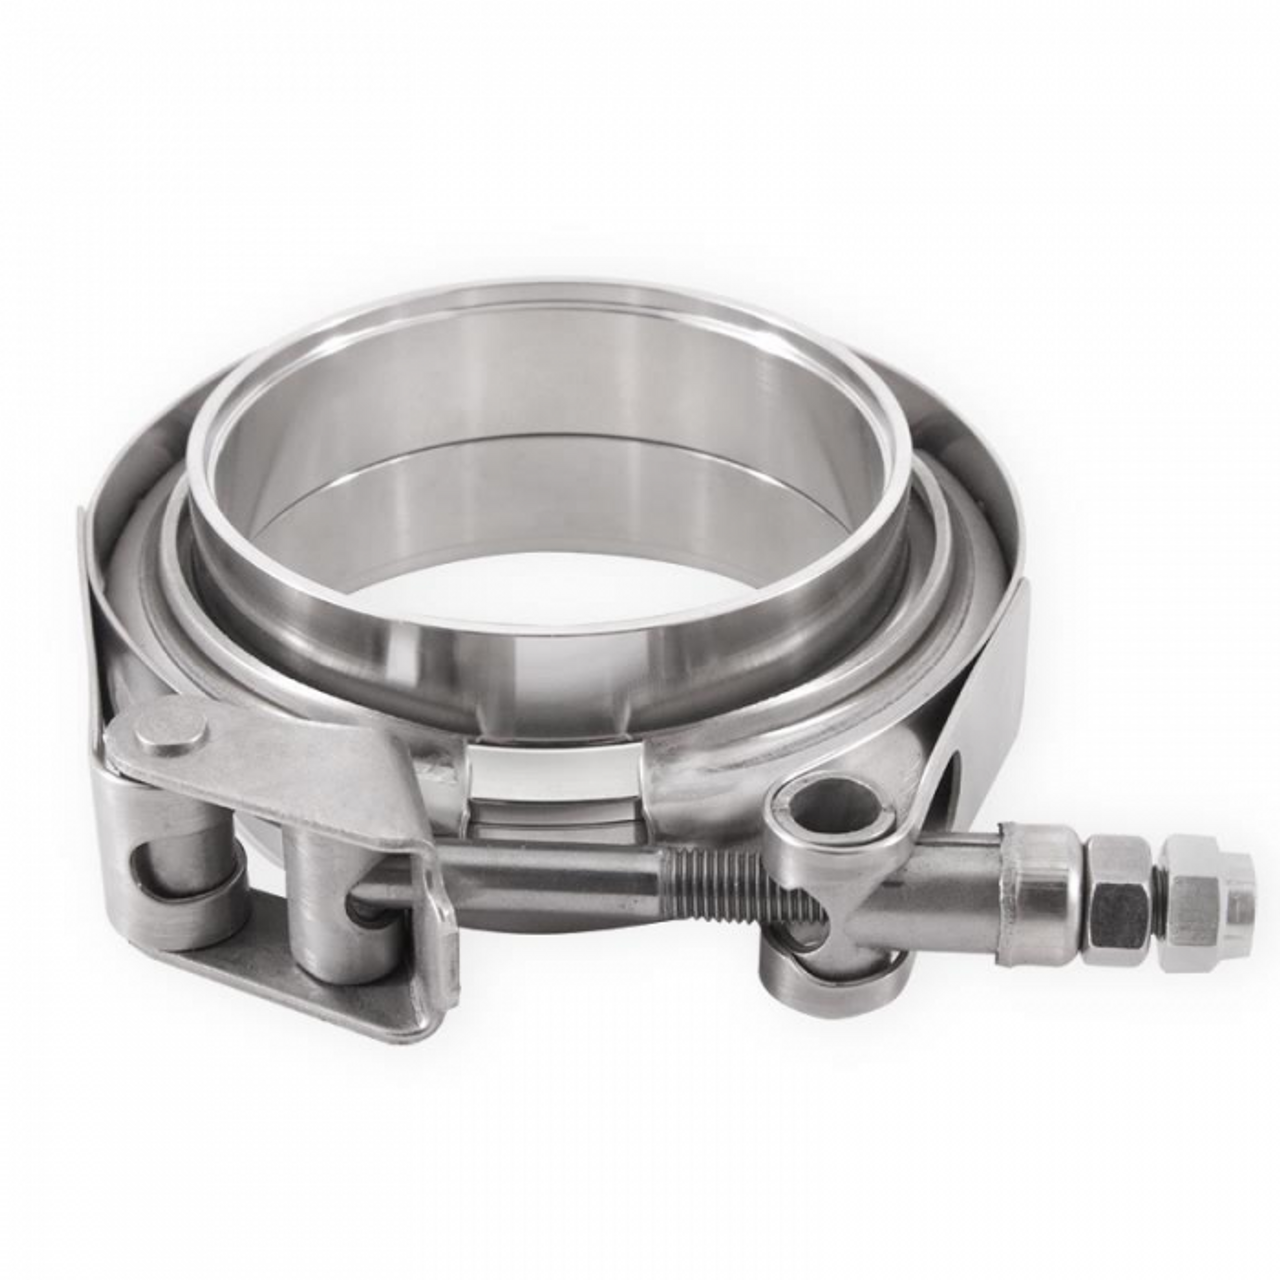 Mishimoto Stainless 1.5" V Band Clamp with Flange (Universal for 1.5" Connections) (MIMMCLAMP-VS-15)-Main View